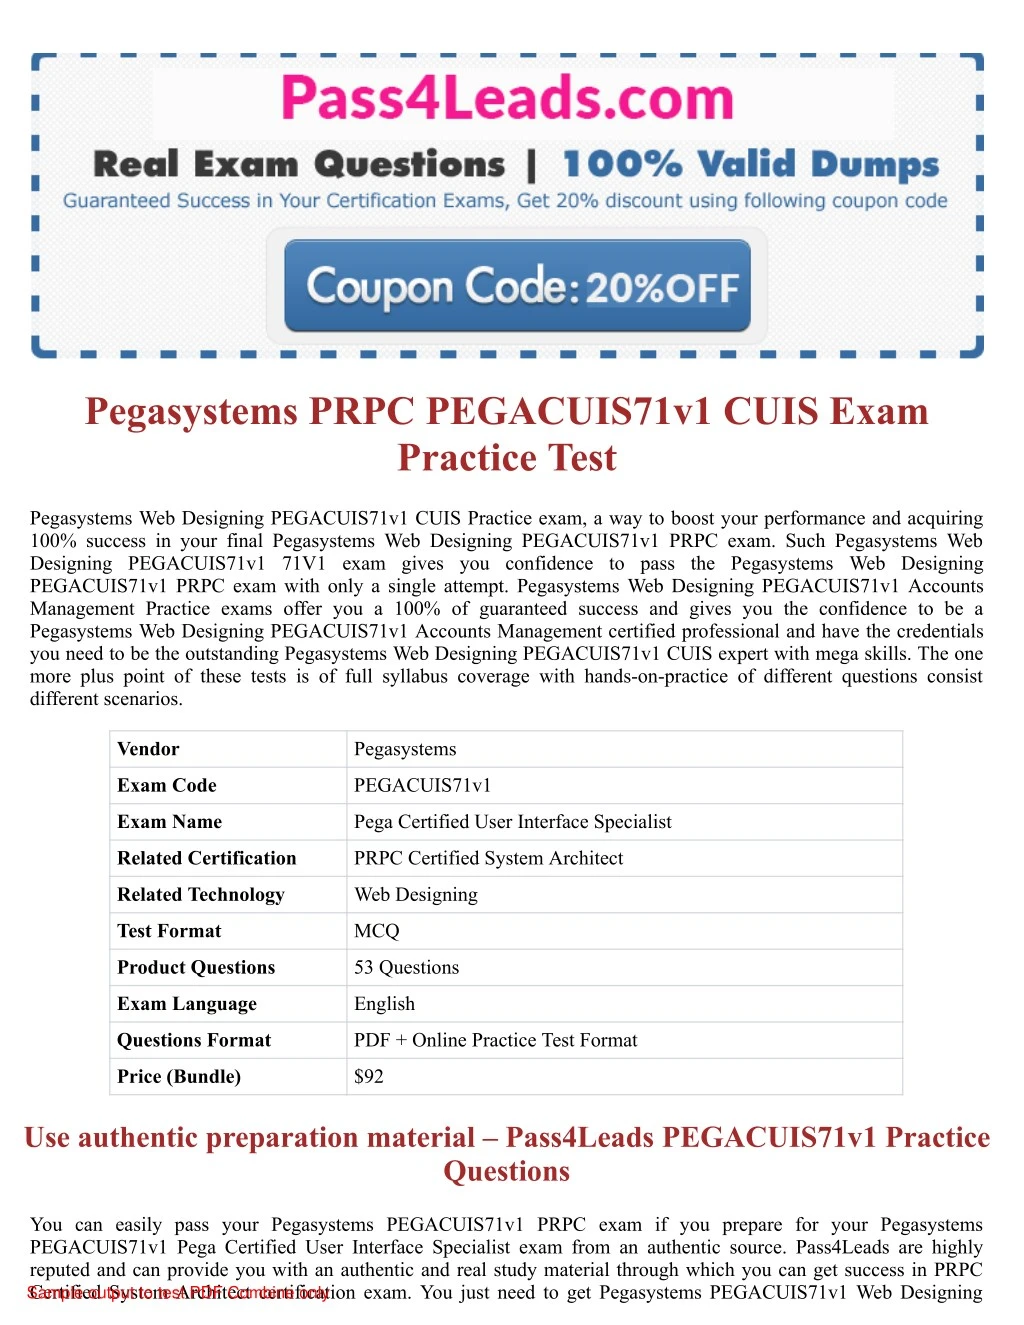 pegasystems prpc pegacuis71v1 cuis exam practice